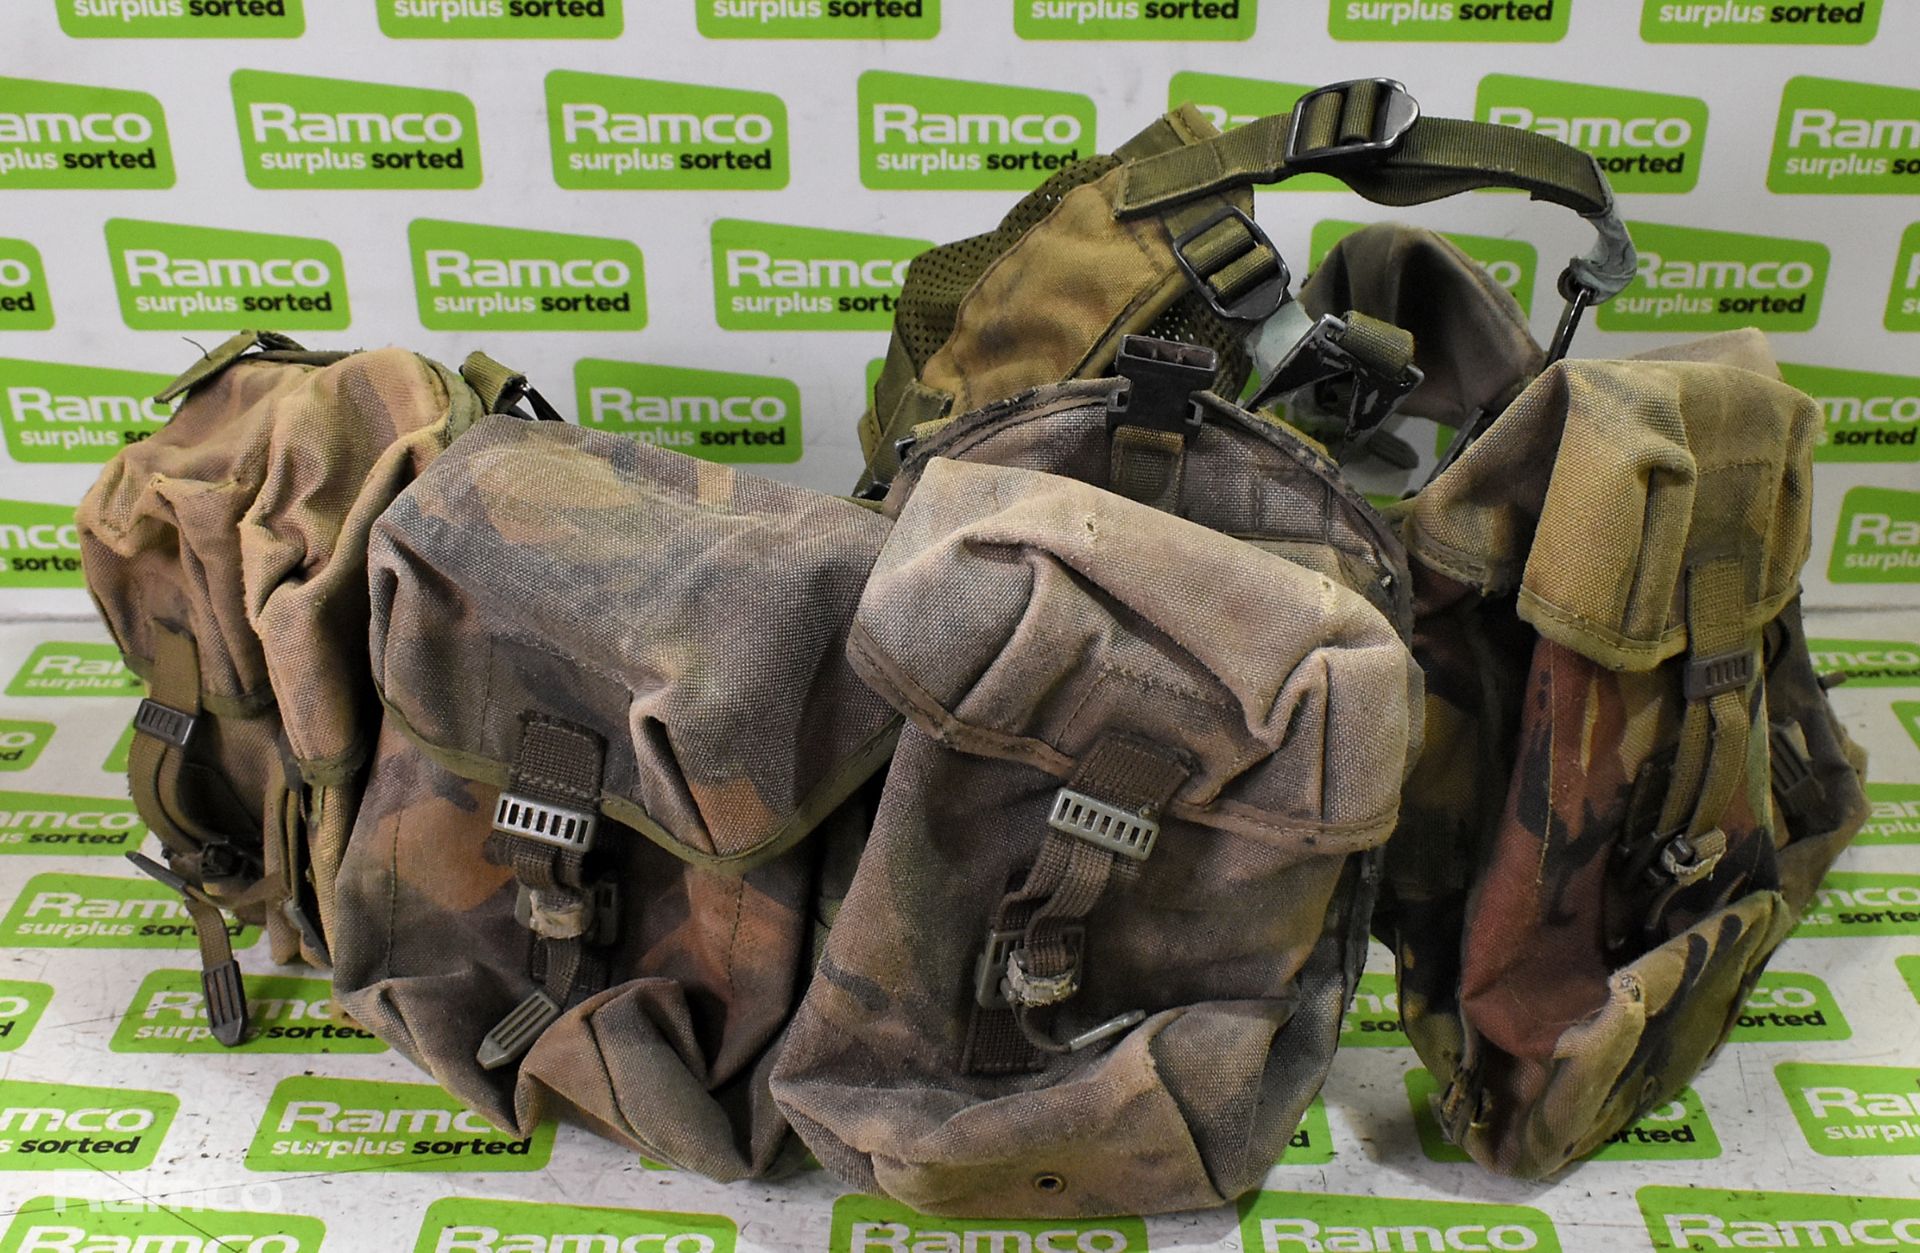 38x British Army DPM vests with pouches - mixed grades and sizes - Image 5 of 6